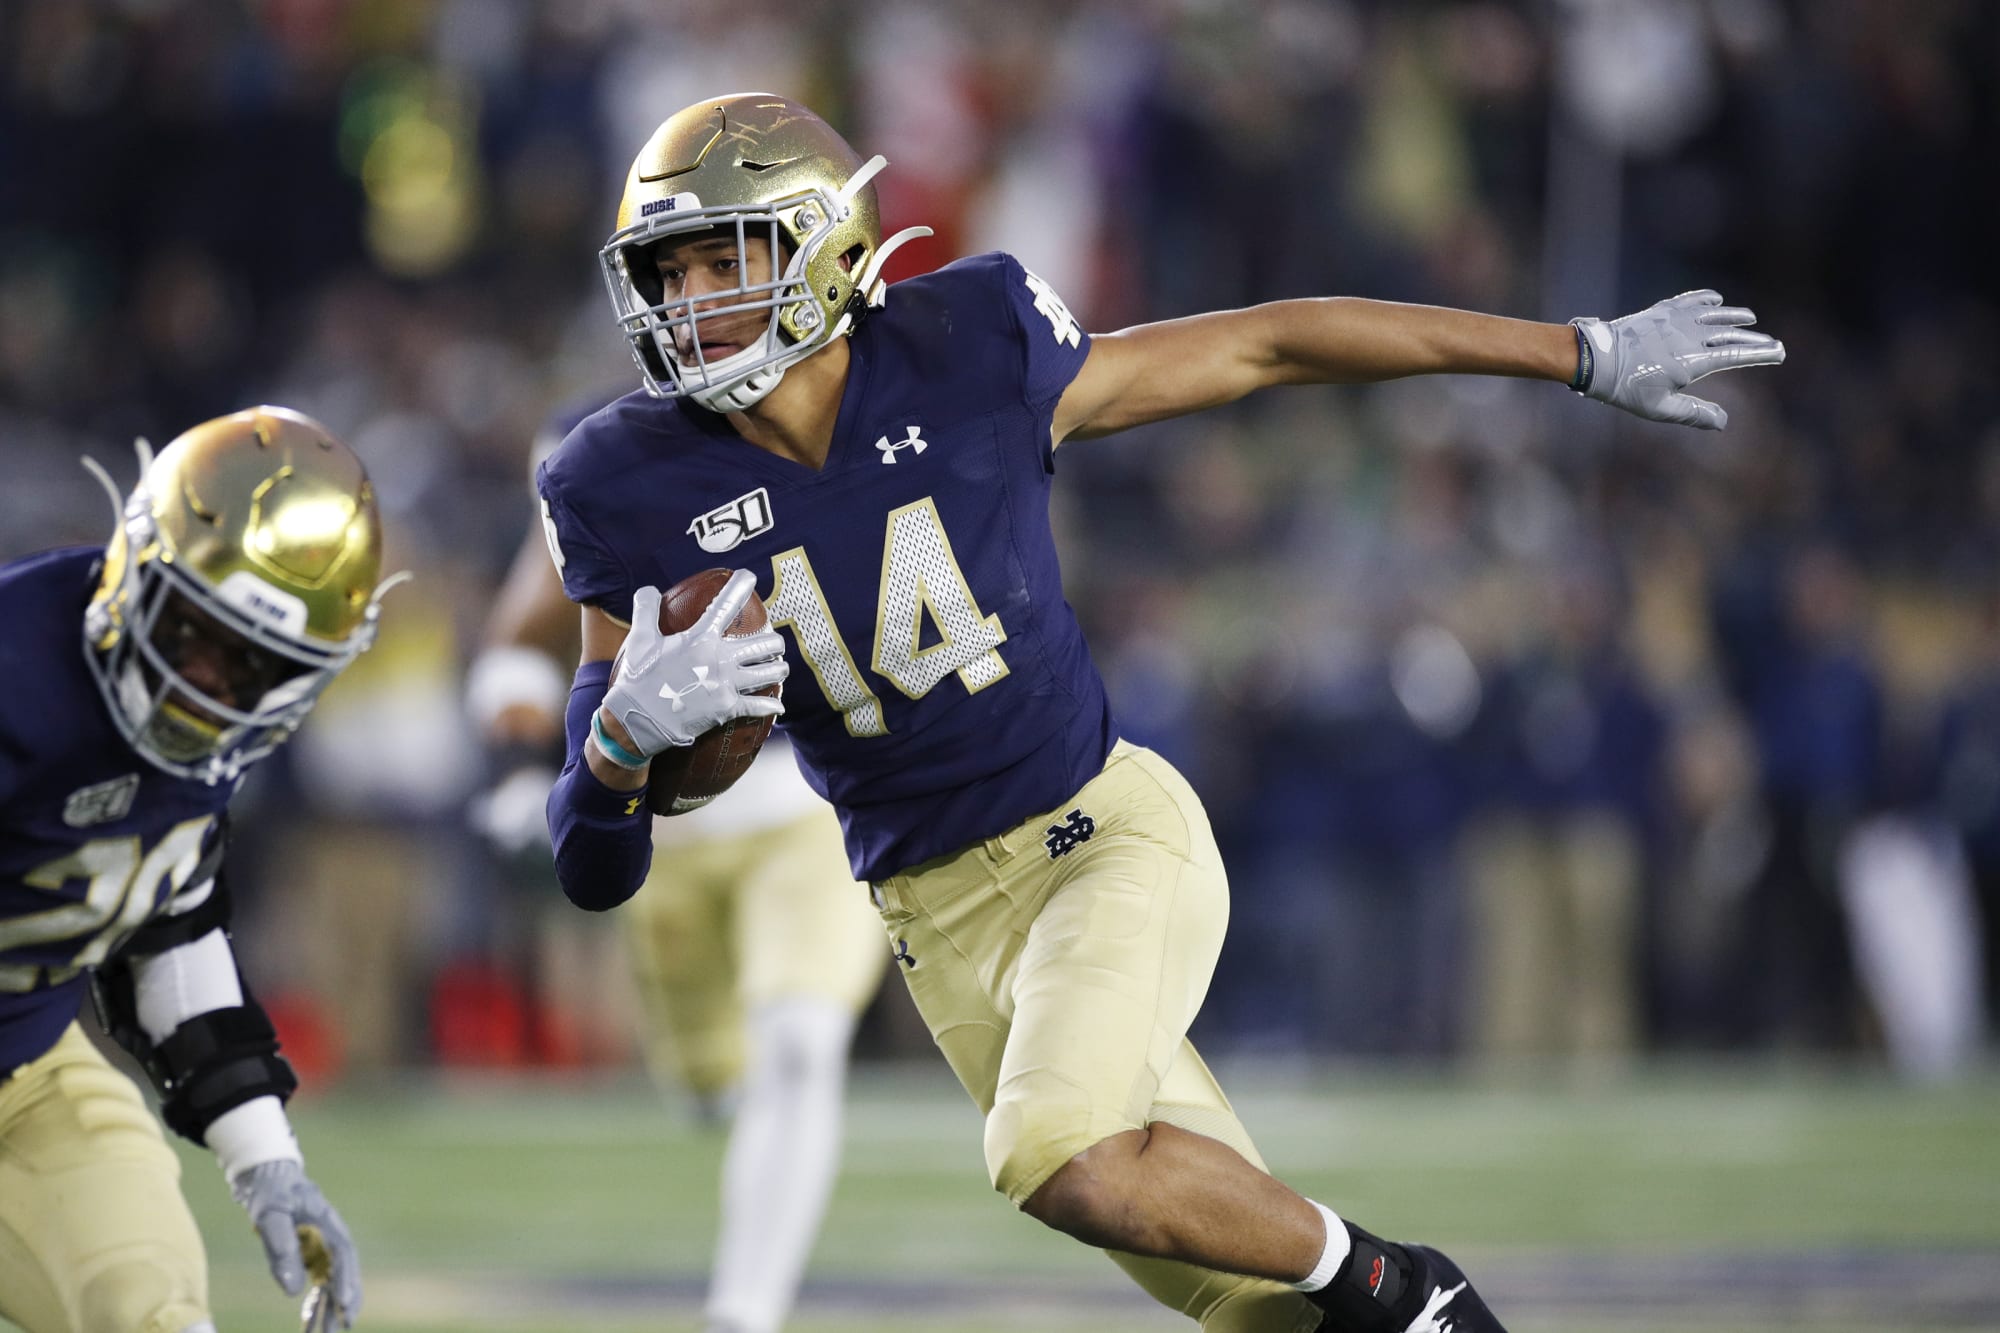 Notre Dame football: Kyle Hamilton named a top-10 player in 2021 by PFF